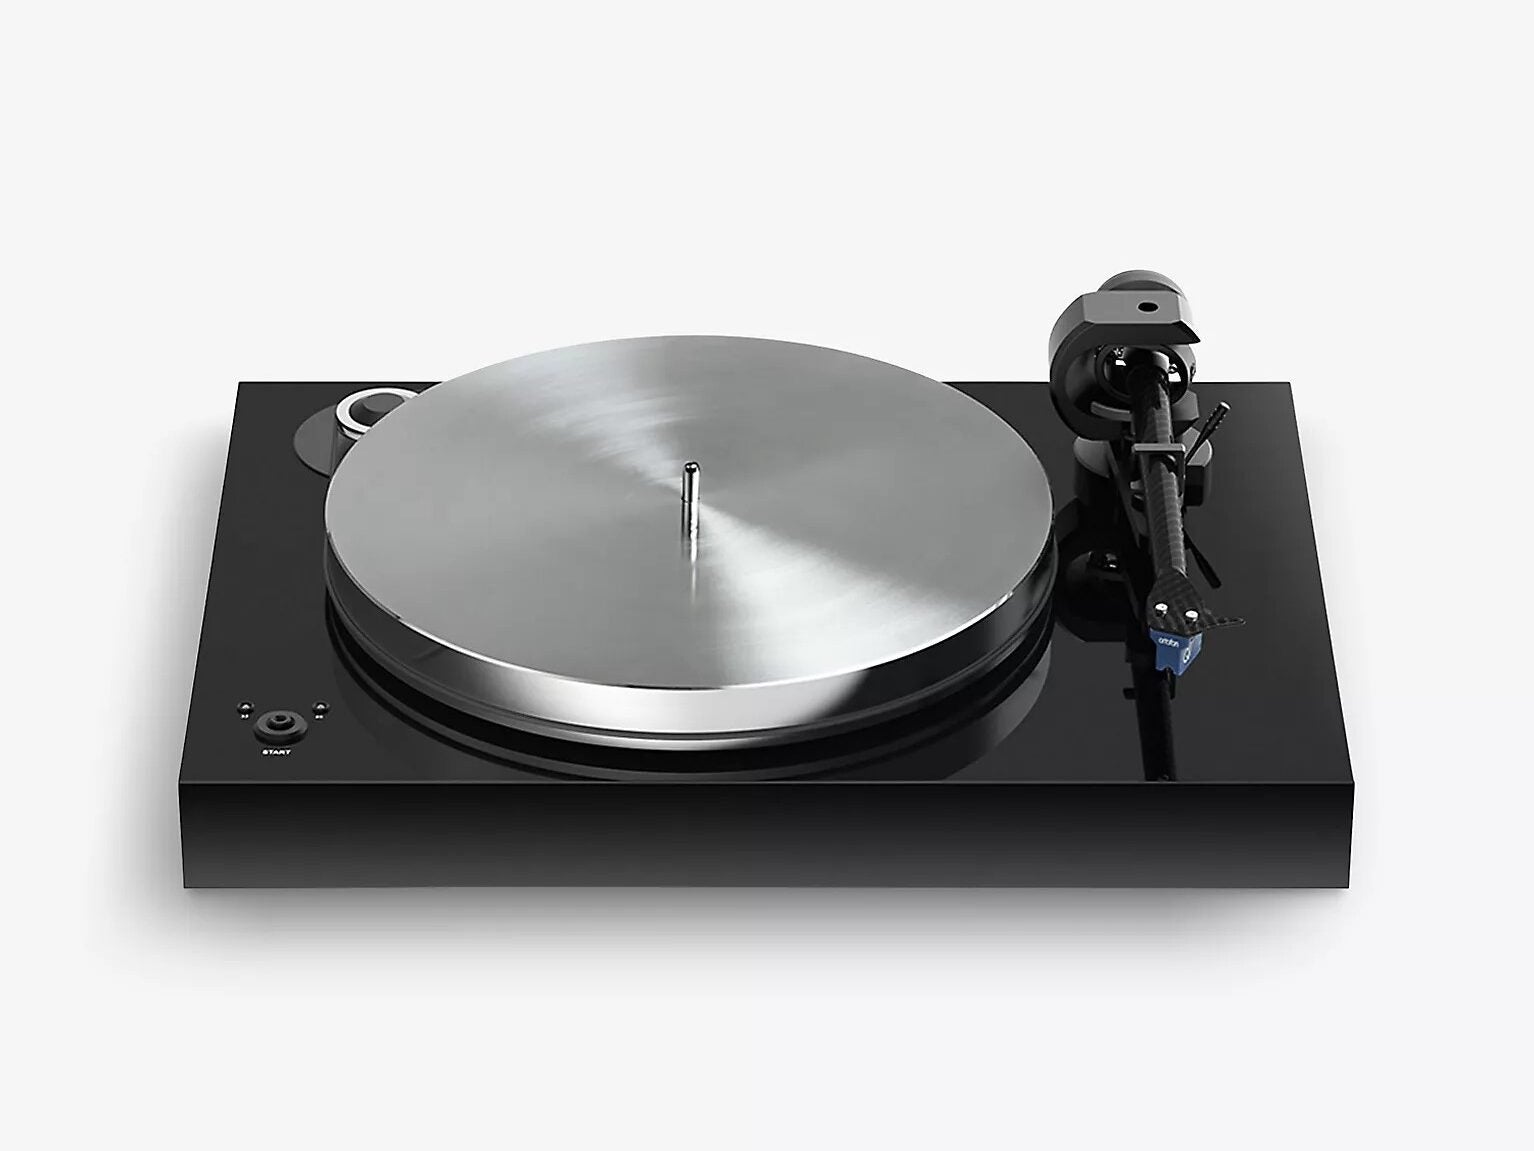 Pro-ject turntable